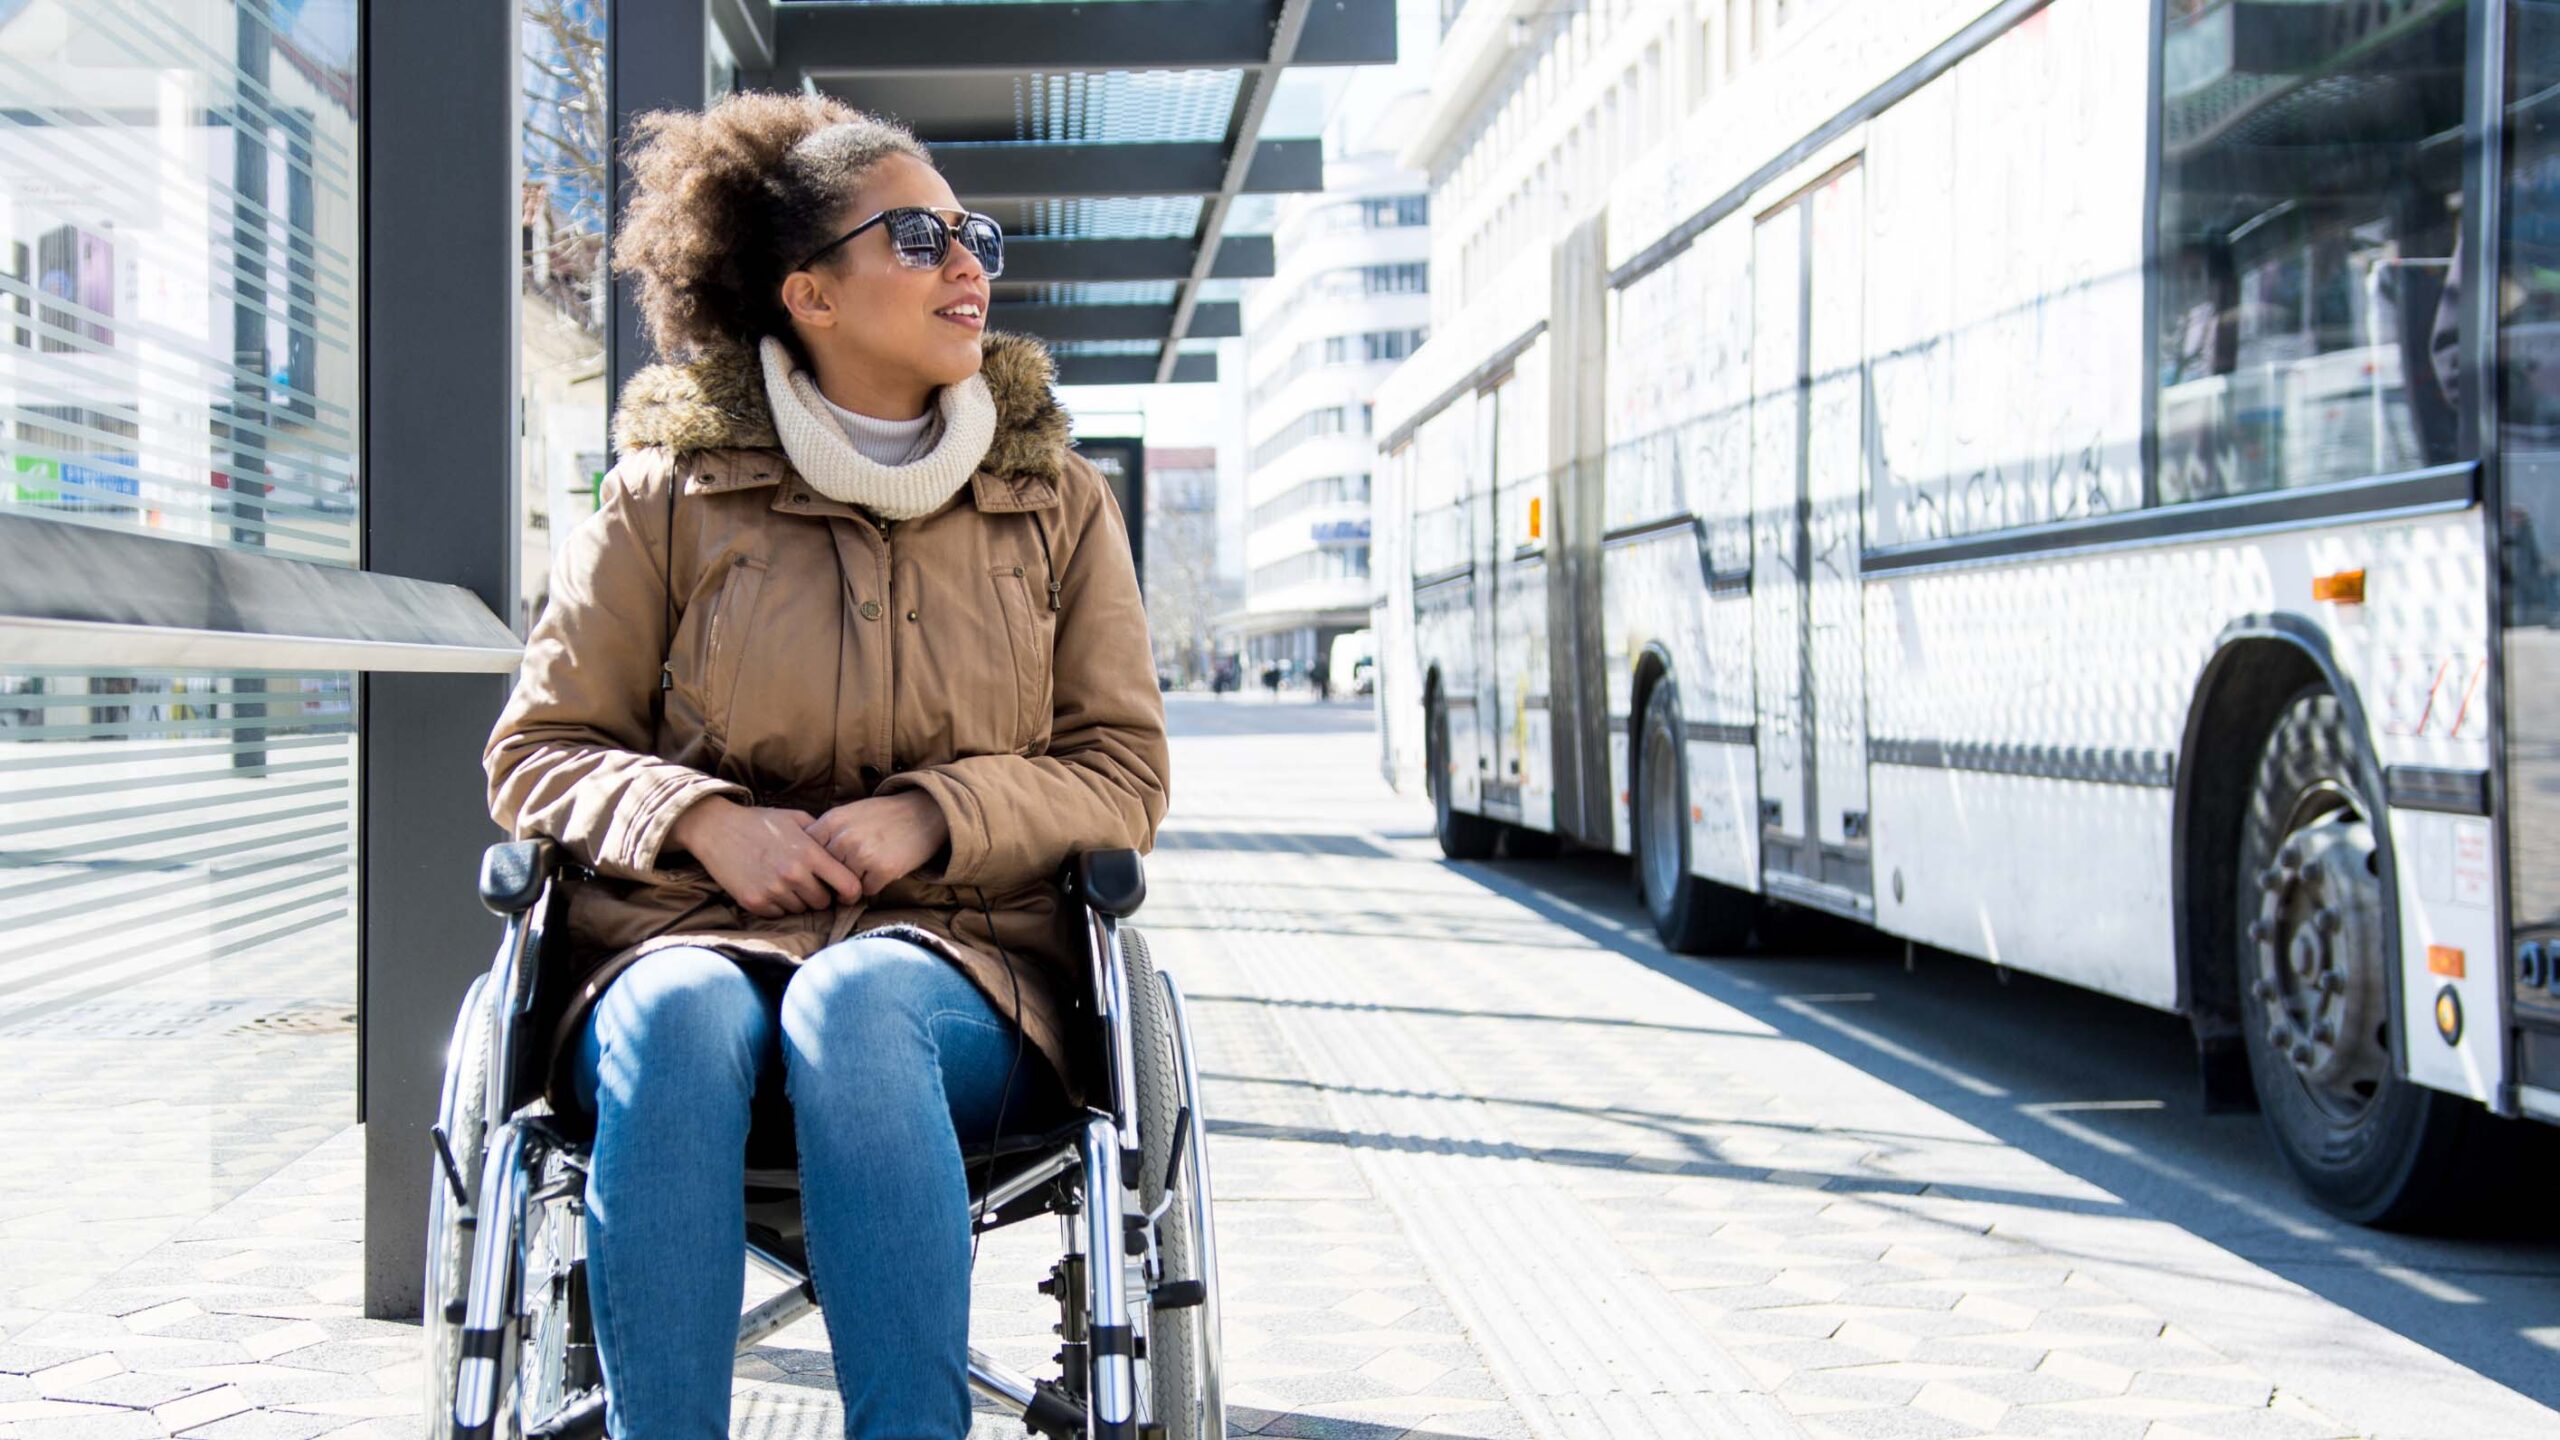 Girl in wheelchair waiting for transit bus